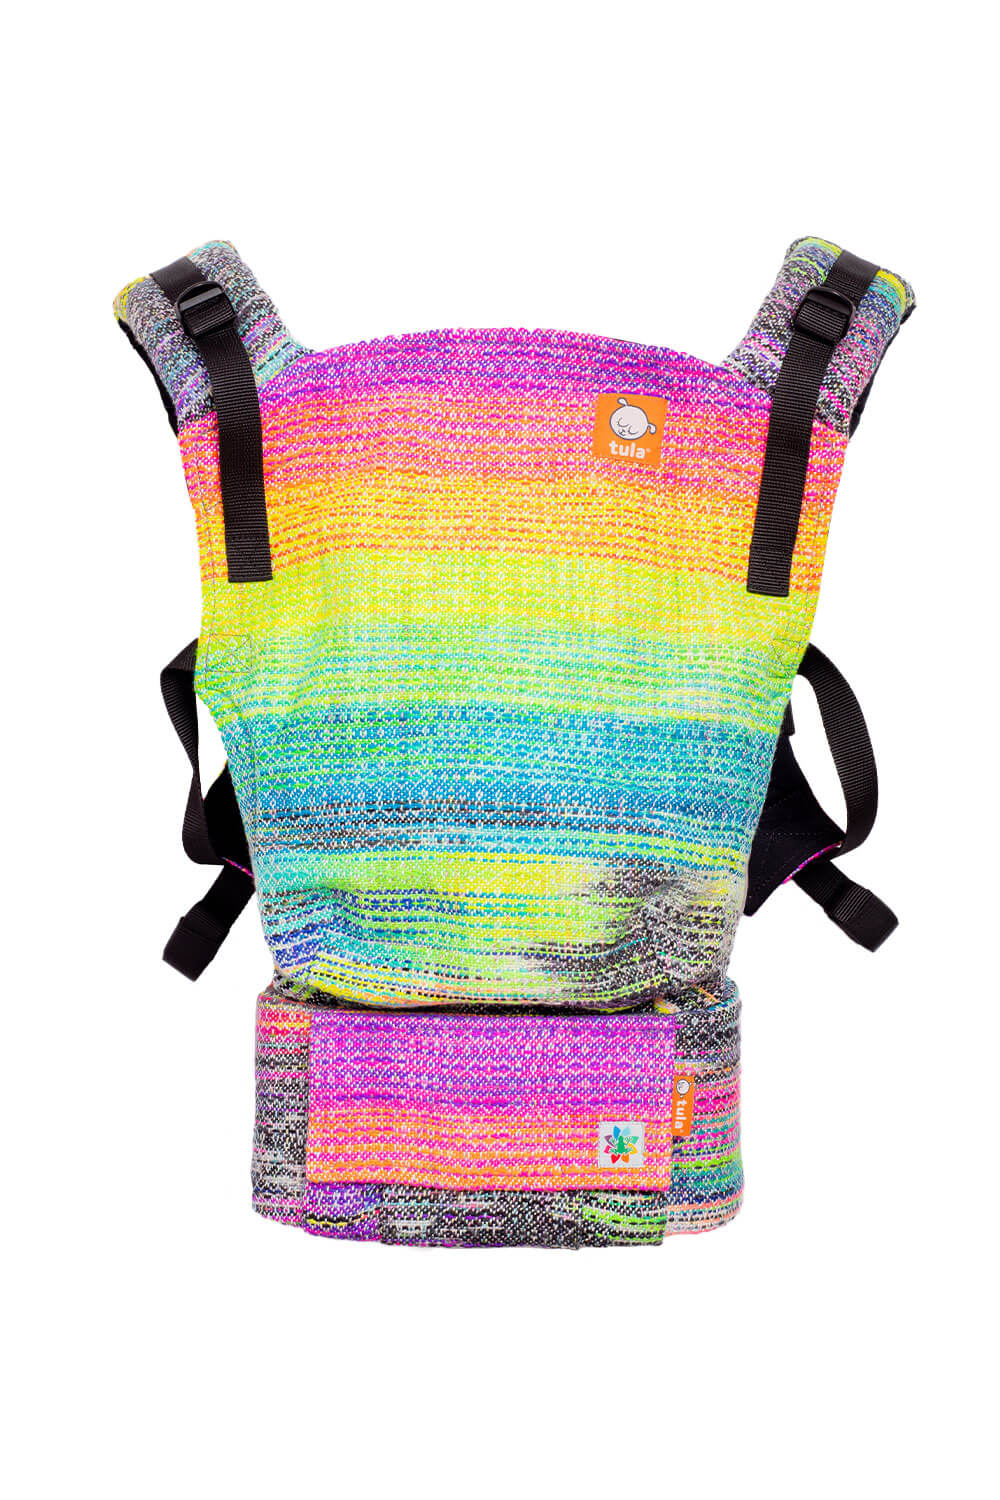 Rainbow Dynamite - Signature Handwoven Free-to-Grow Baby Carrier